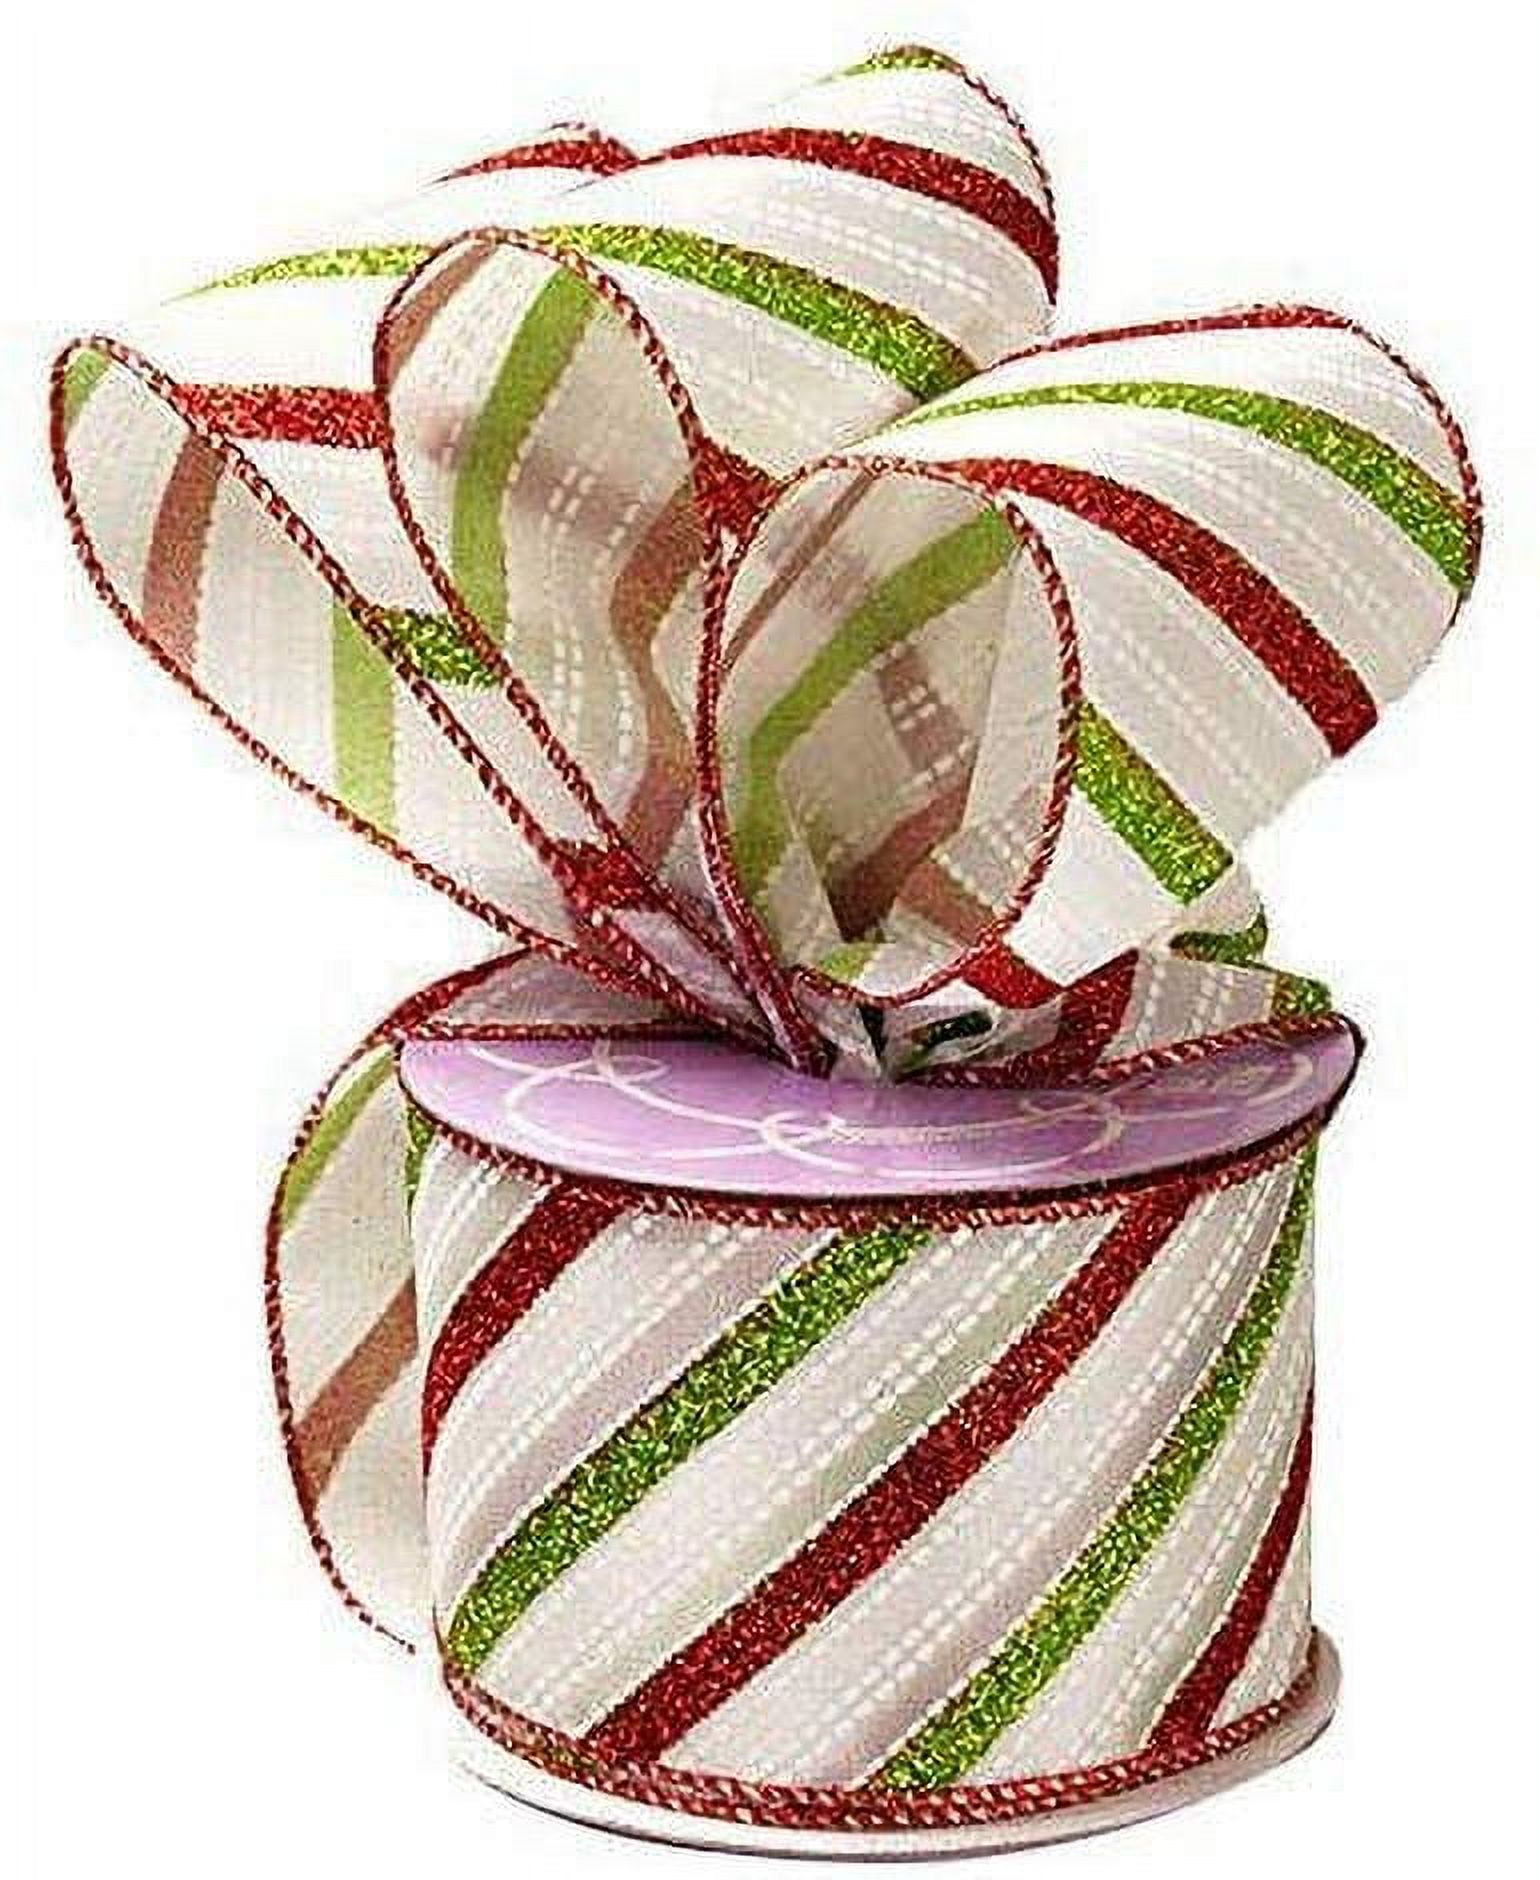 Ribbon Traditions Christmas Red / Green / White Diagonal Stripes Wired  Ribbon 2 1/2 by 25 Yards